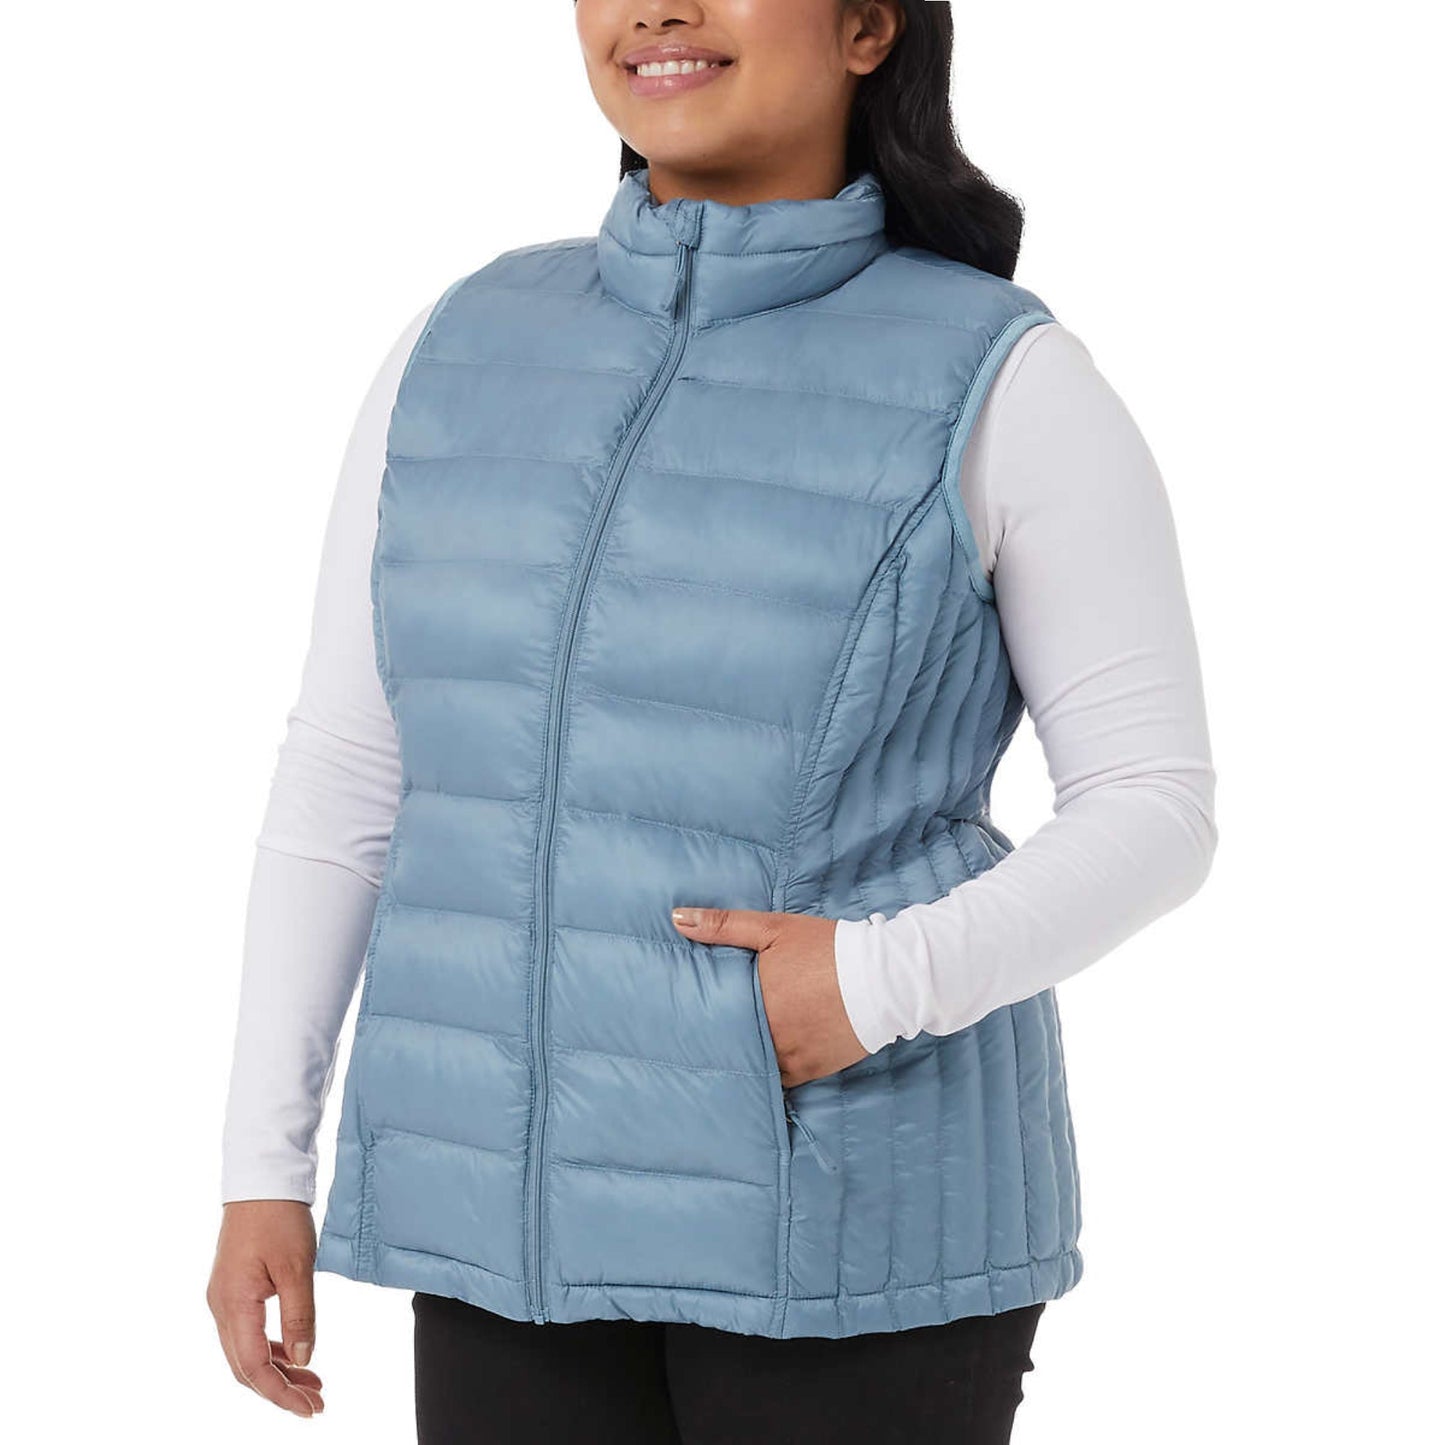 32 Degrees Women's Quilted Stand-up Collar Lightweight Warmth Full Zip Vest